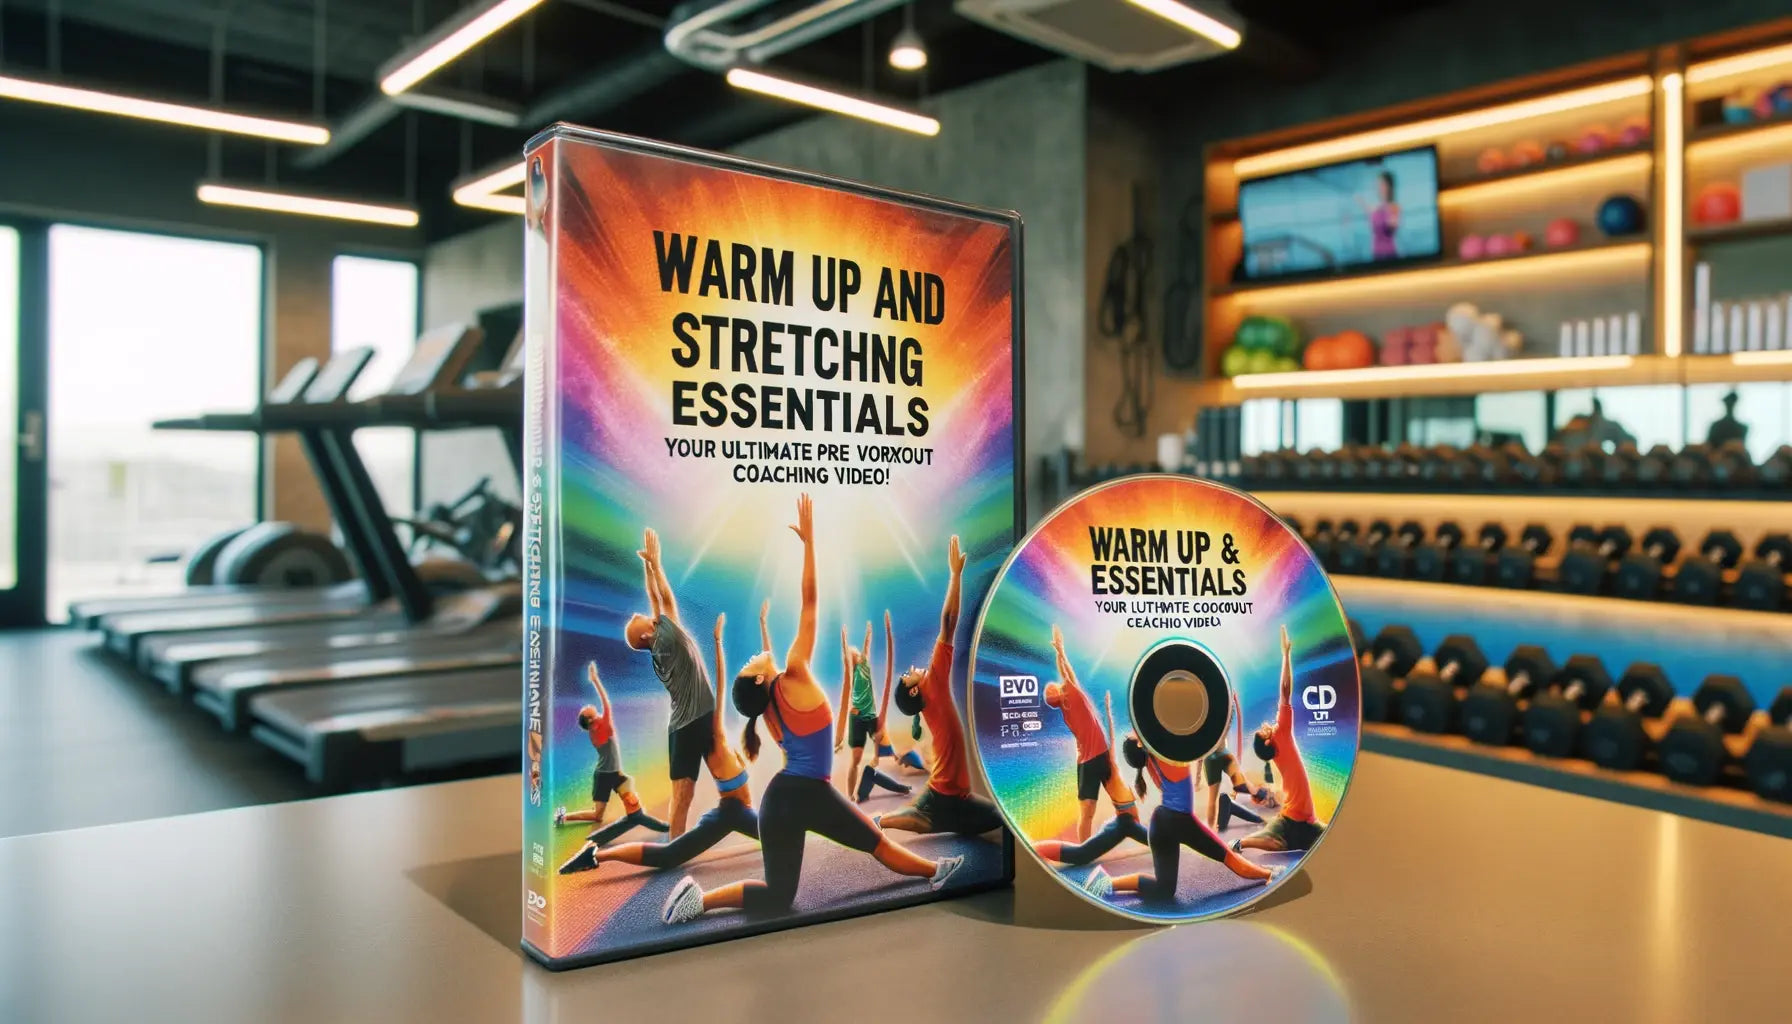 Warm Up and Stretching Essentials | Your Ultimate Pre-Workout Coaching Video - Image #4